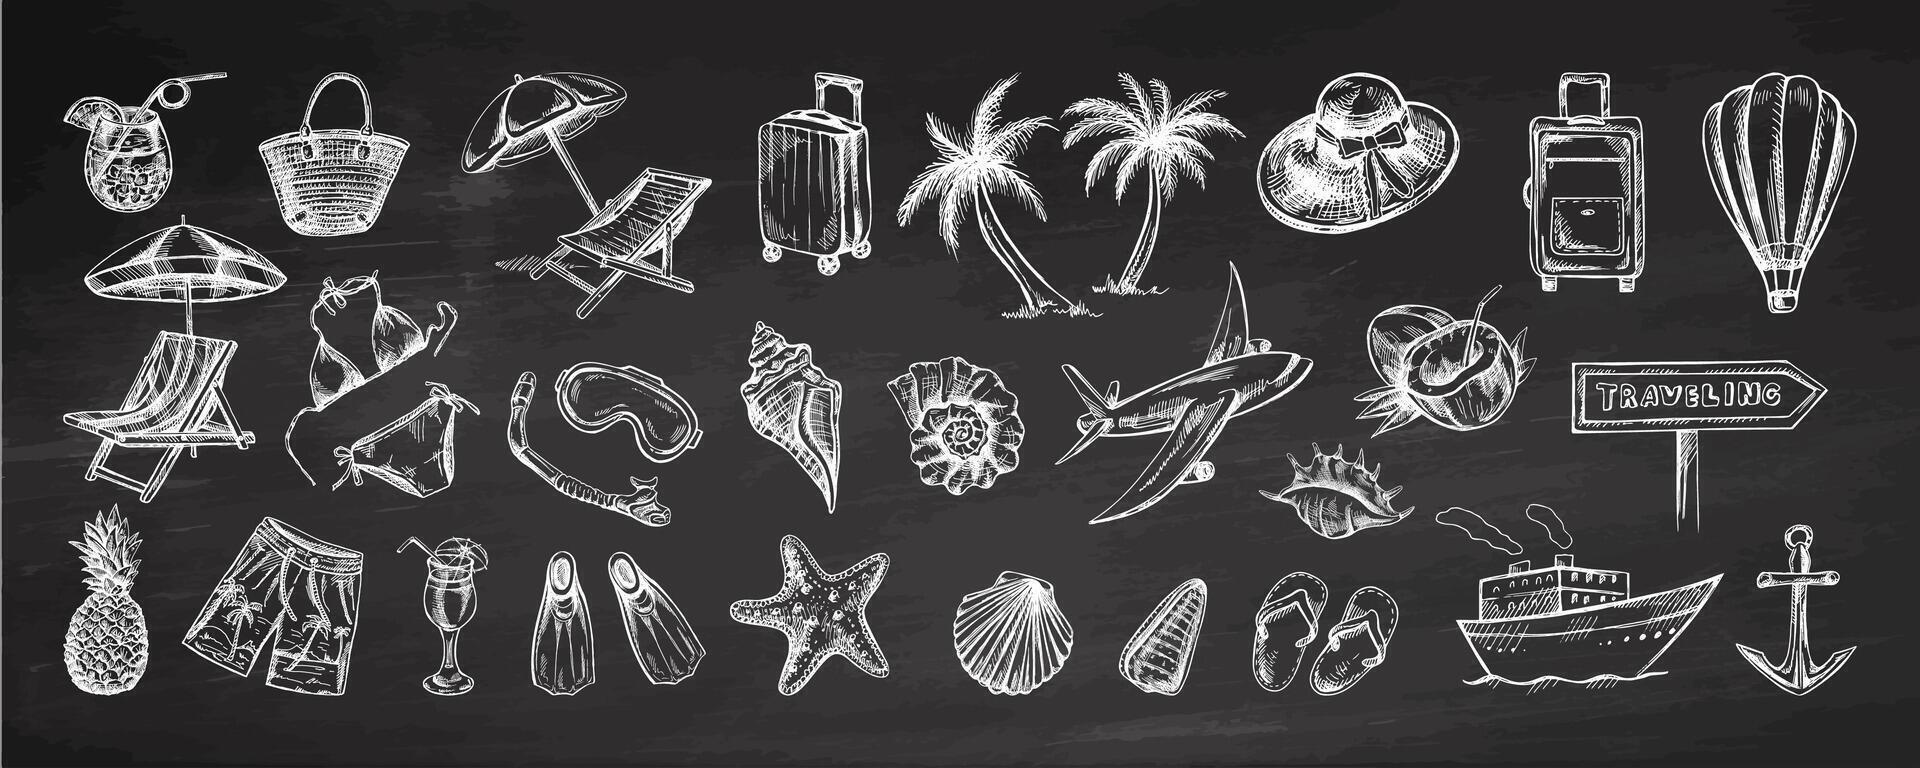 A set of hand-drawn travel sketches. Badges for tourism and camping on the background of the blackboard. A clipart with elements of travel, bags, transport, shells, bikinis. vector